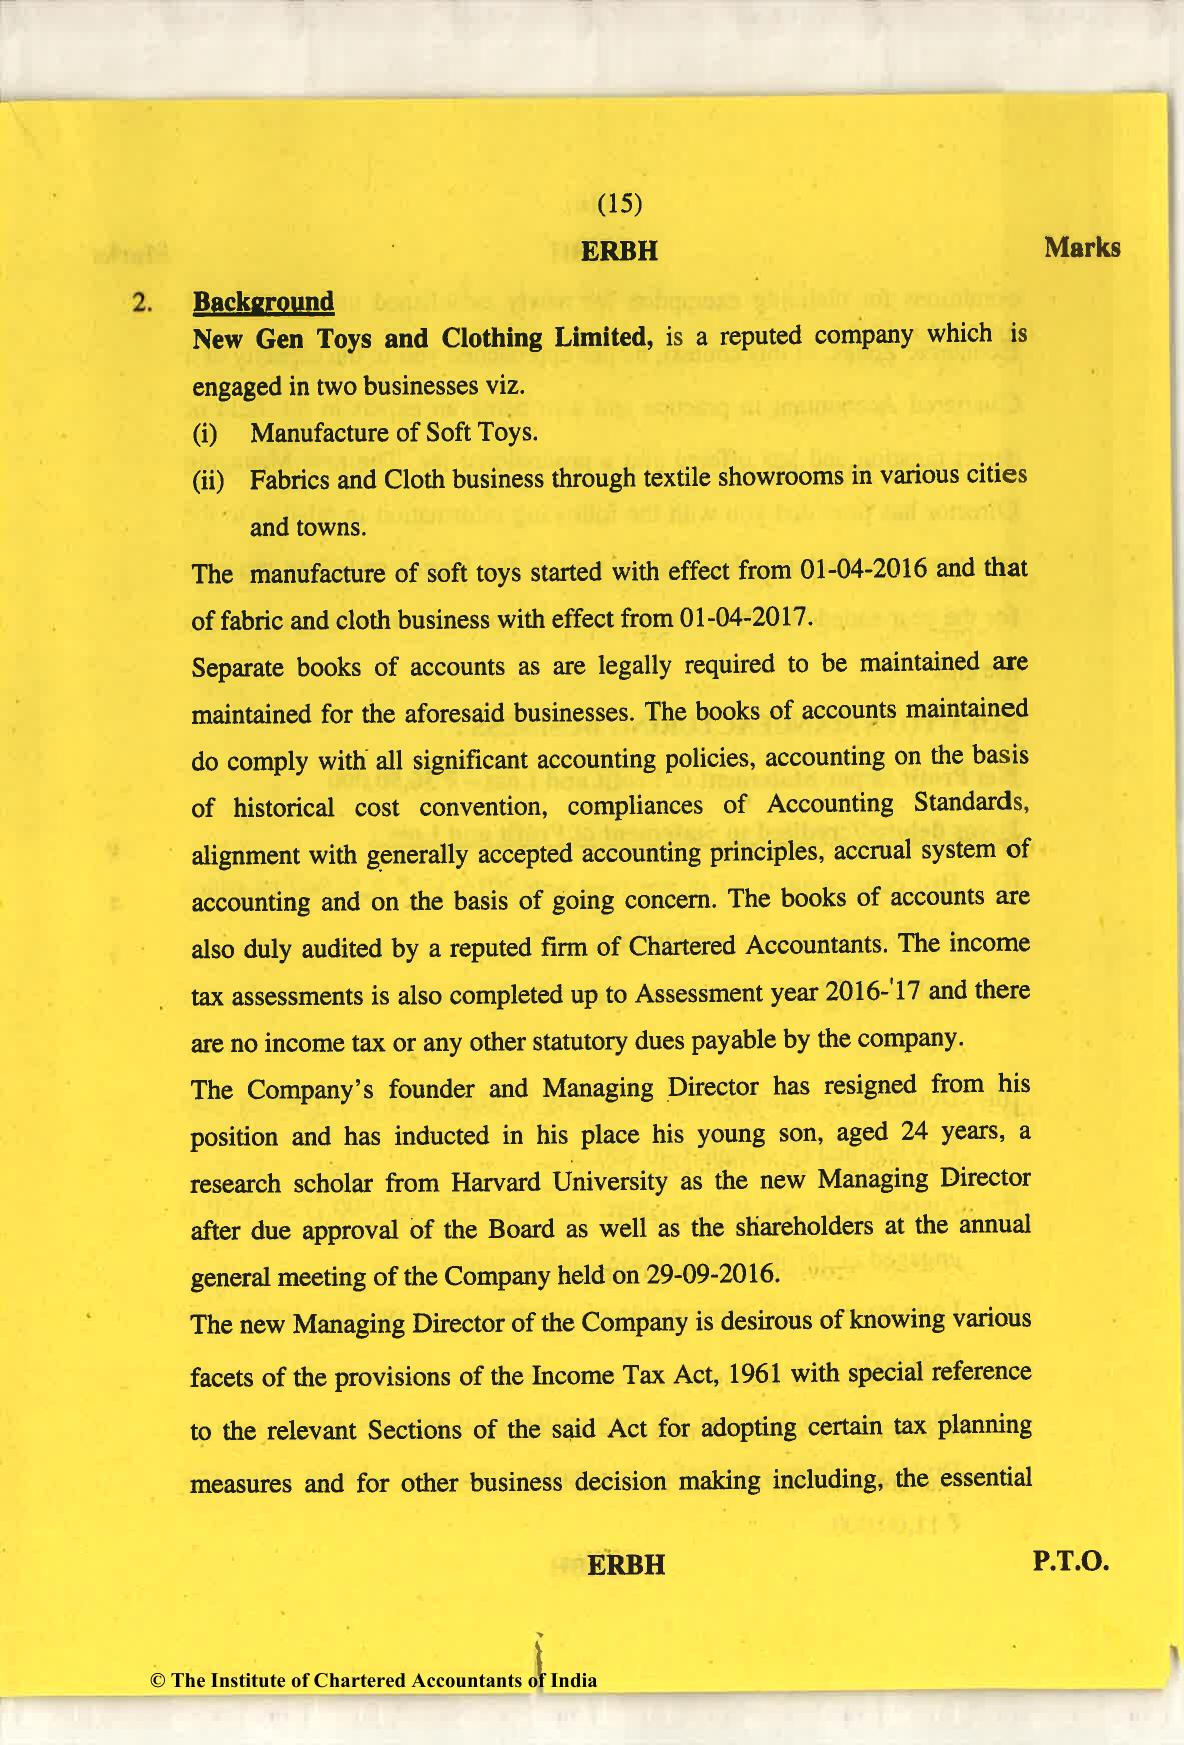 CA Final May 2018 Question Paper - Paper 6F – Multidisciplinary Case Study - Page 15